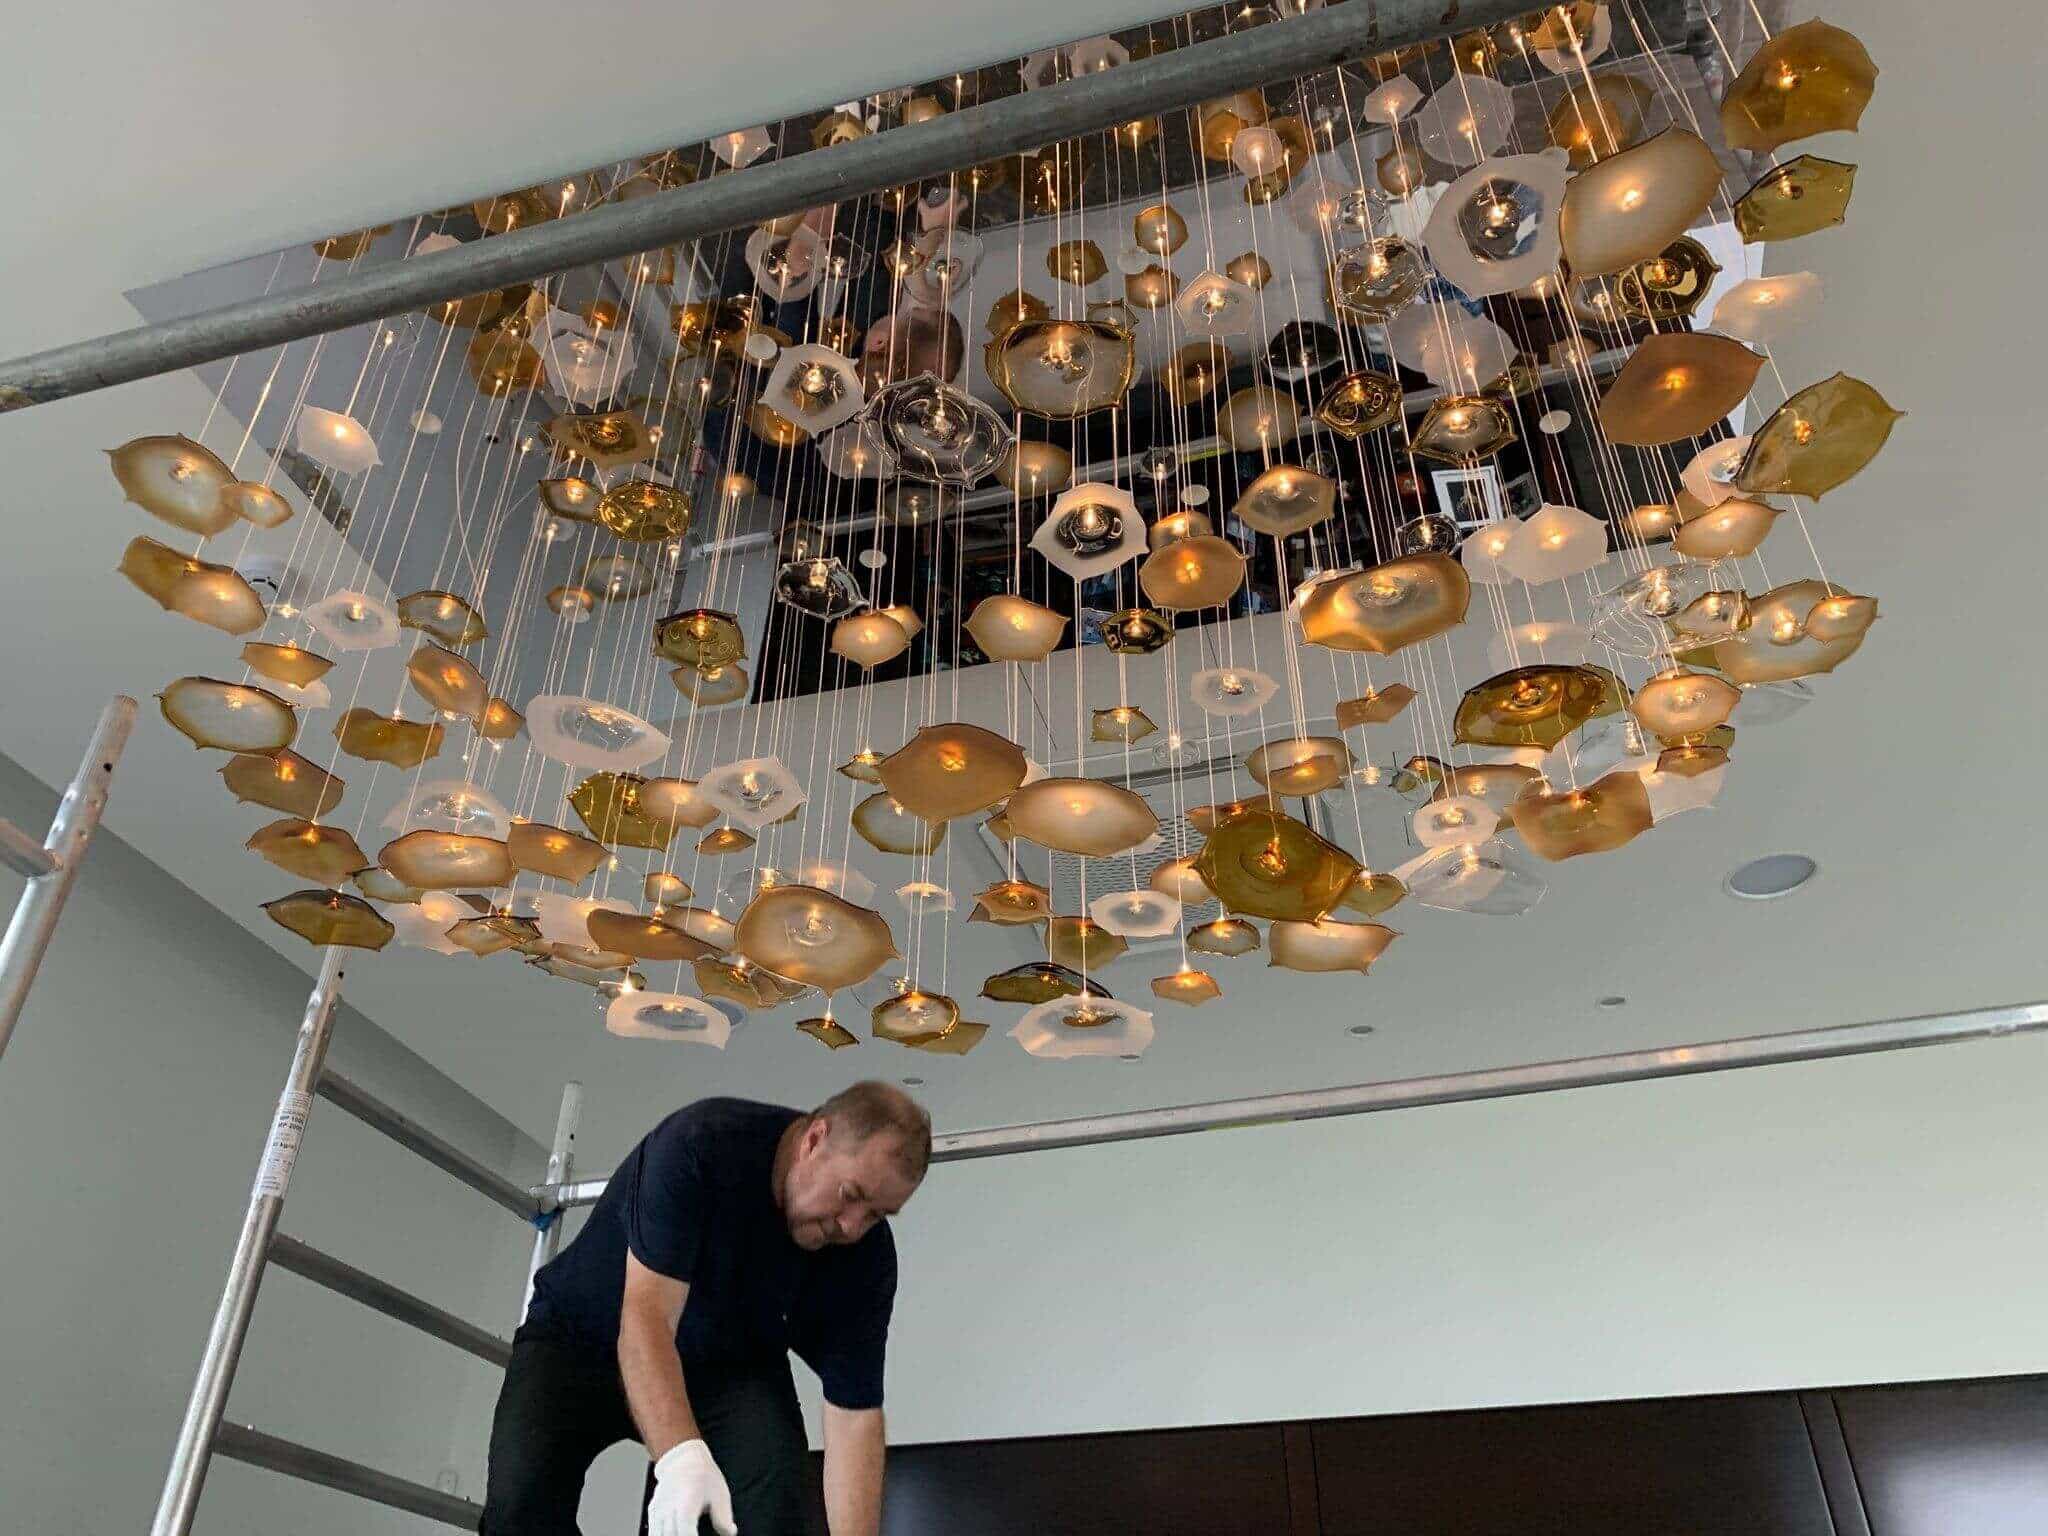 How To Install A Chandelier